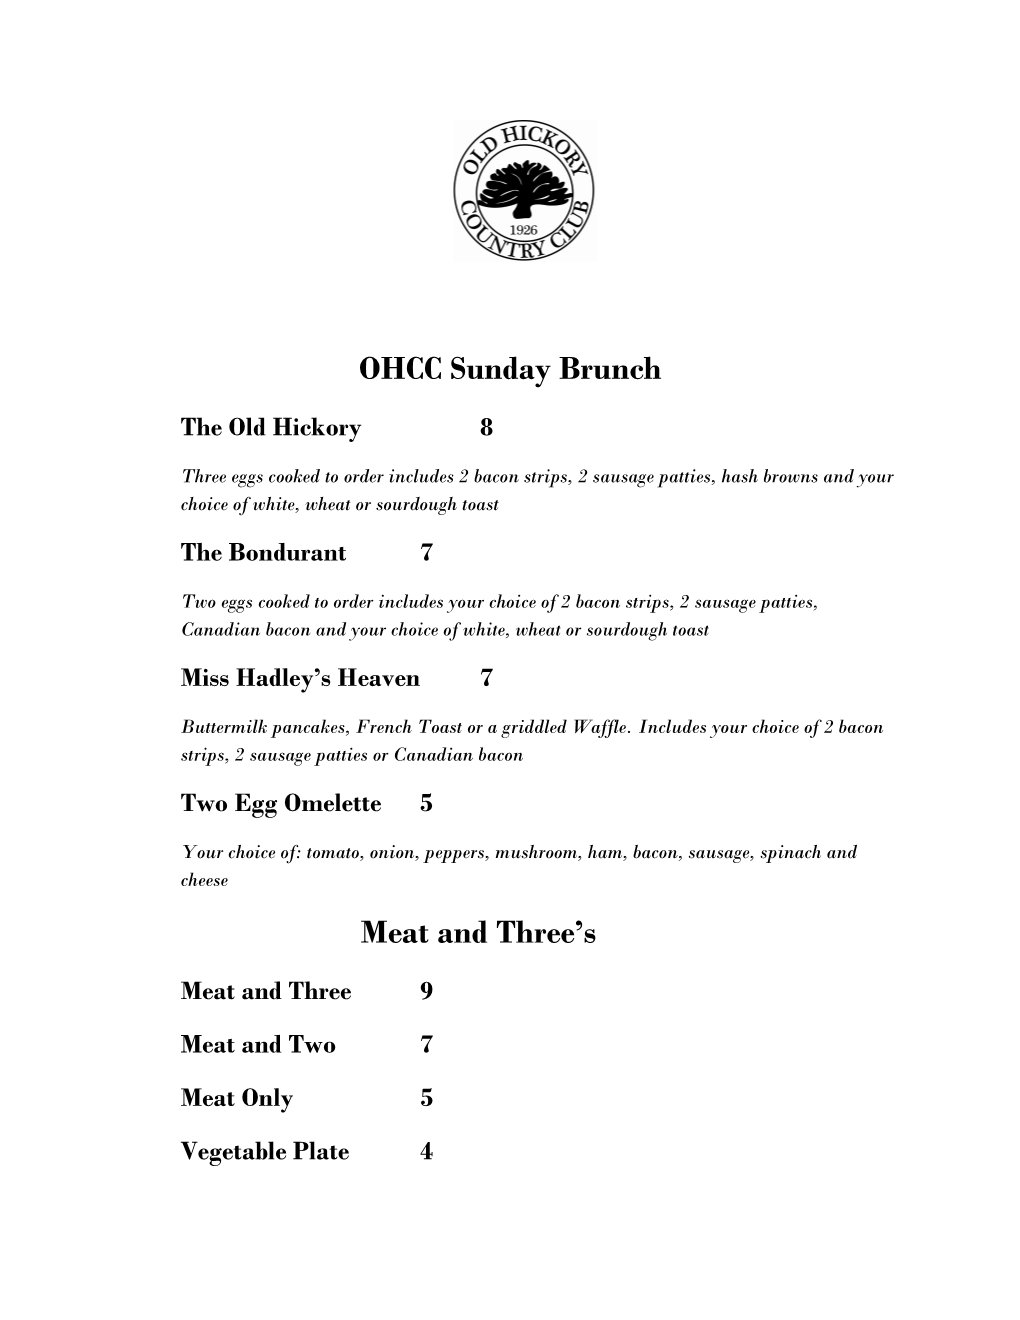 OHCC Sunday Brunch Meat and Three's